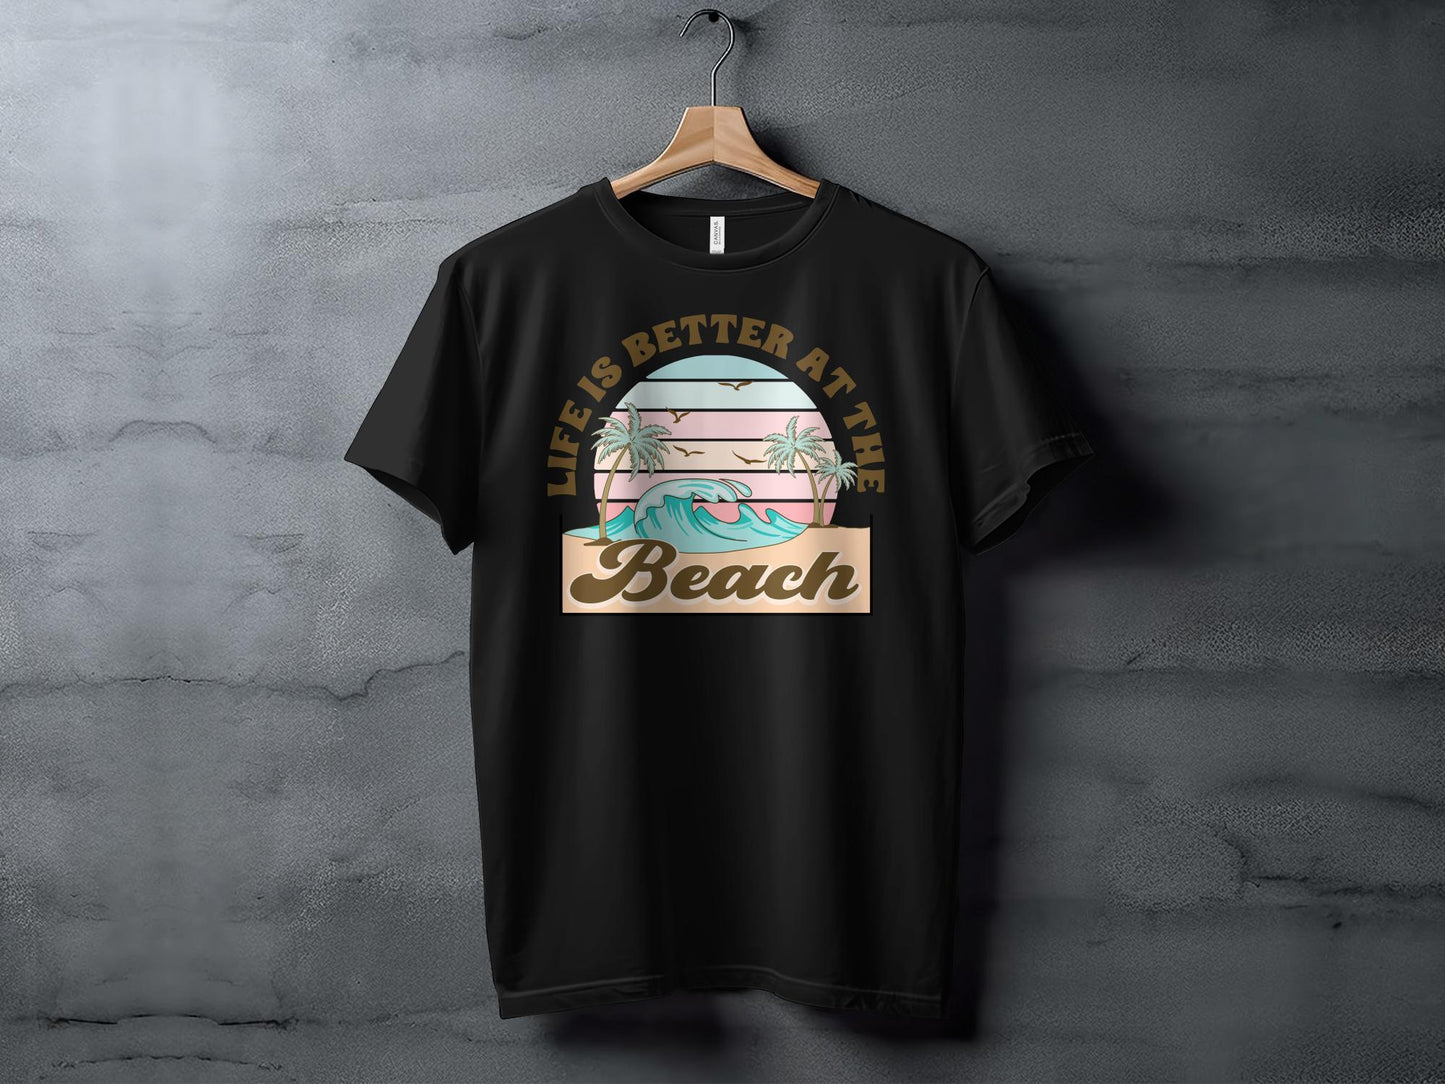 Tropical Beach T-Shirt, Life Is Better At The Beach, Sunset Palm Tree Graphic Tee, Casual Summer Vacation Shirt, Unisex Gift